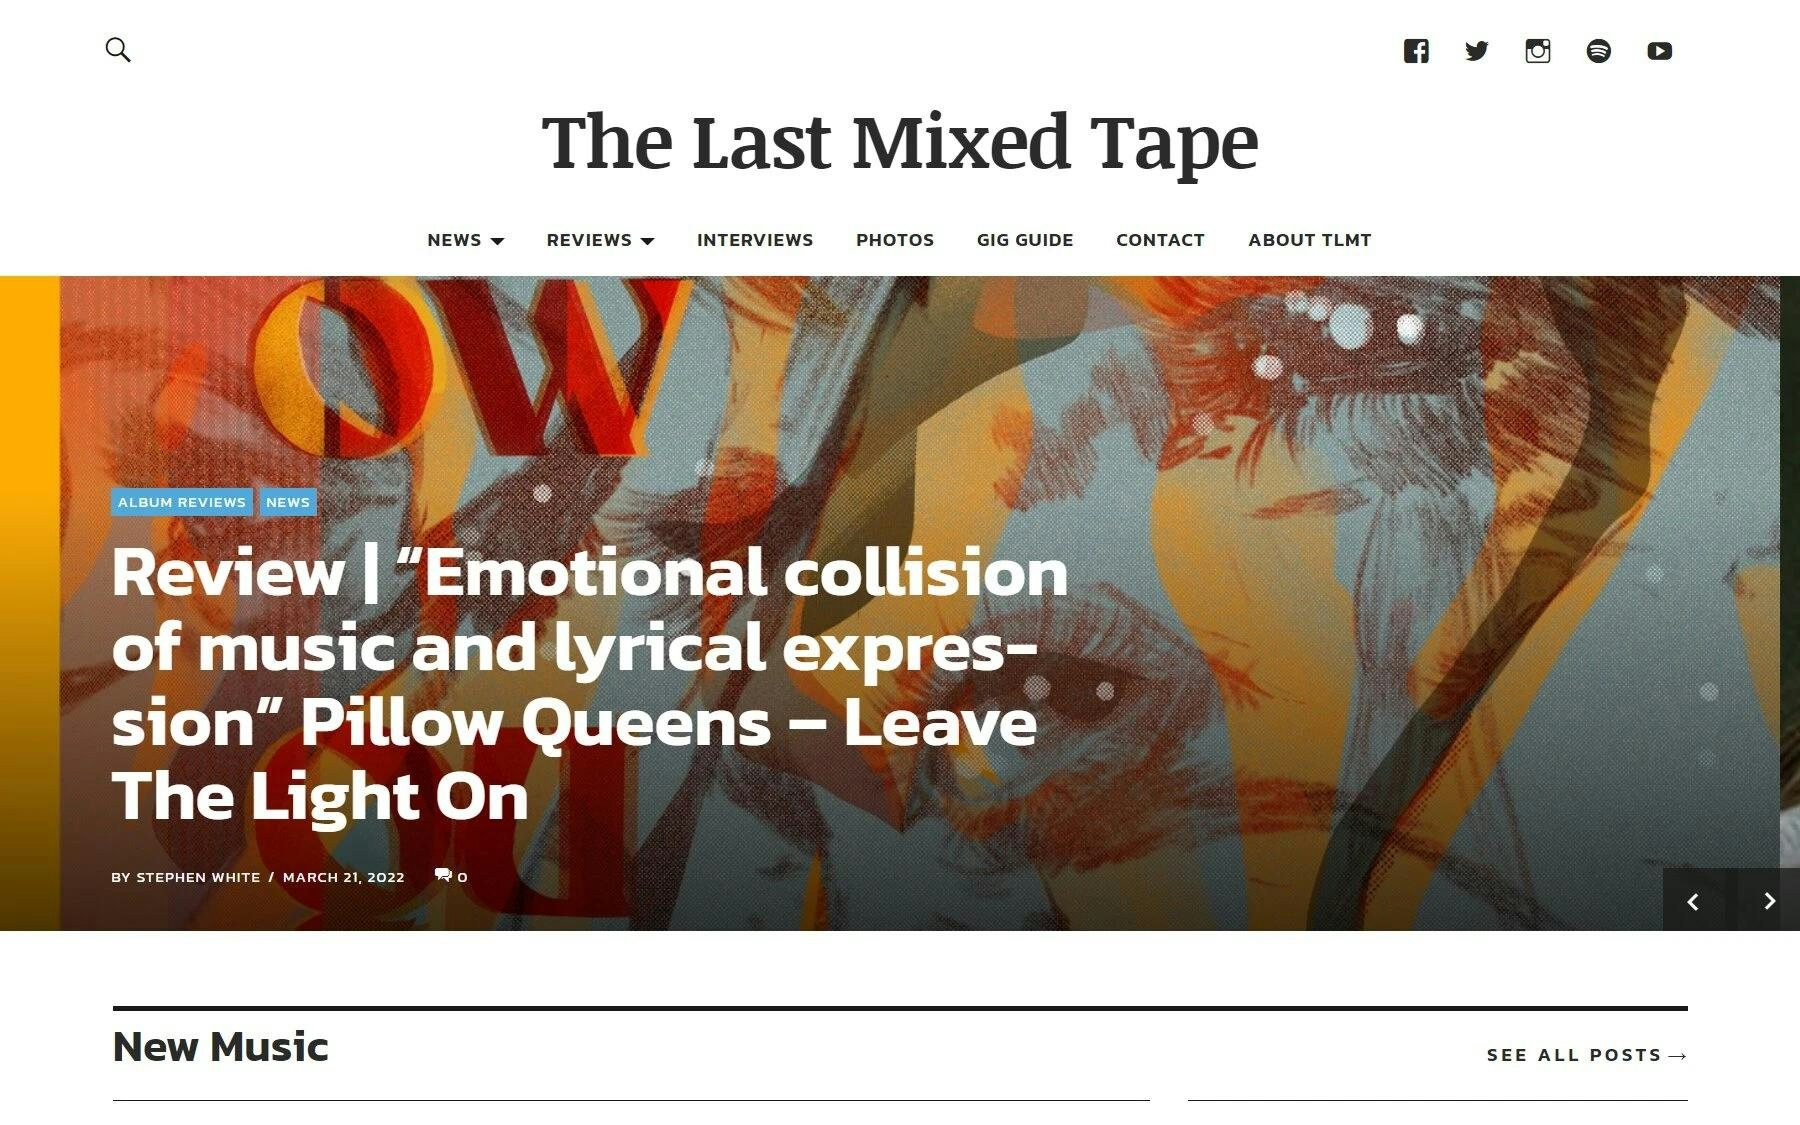 The Last Mixed Tape music blog